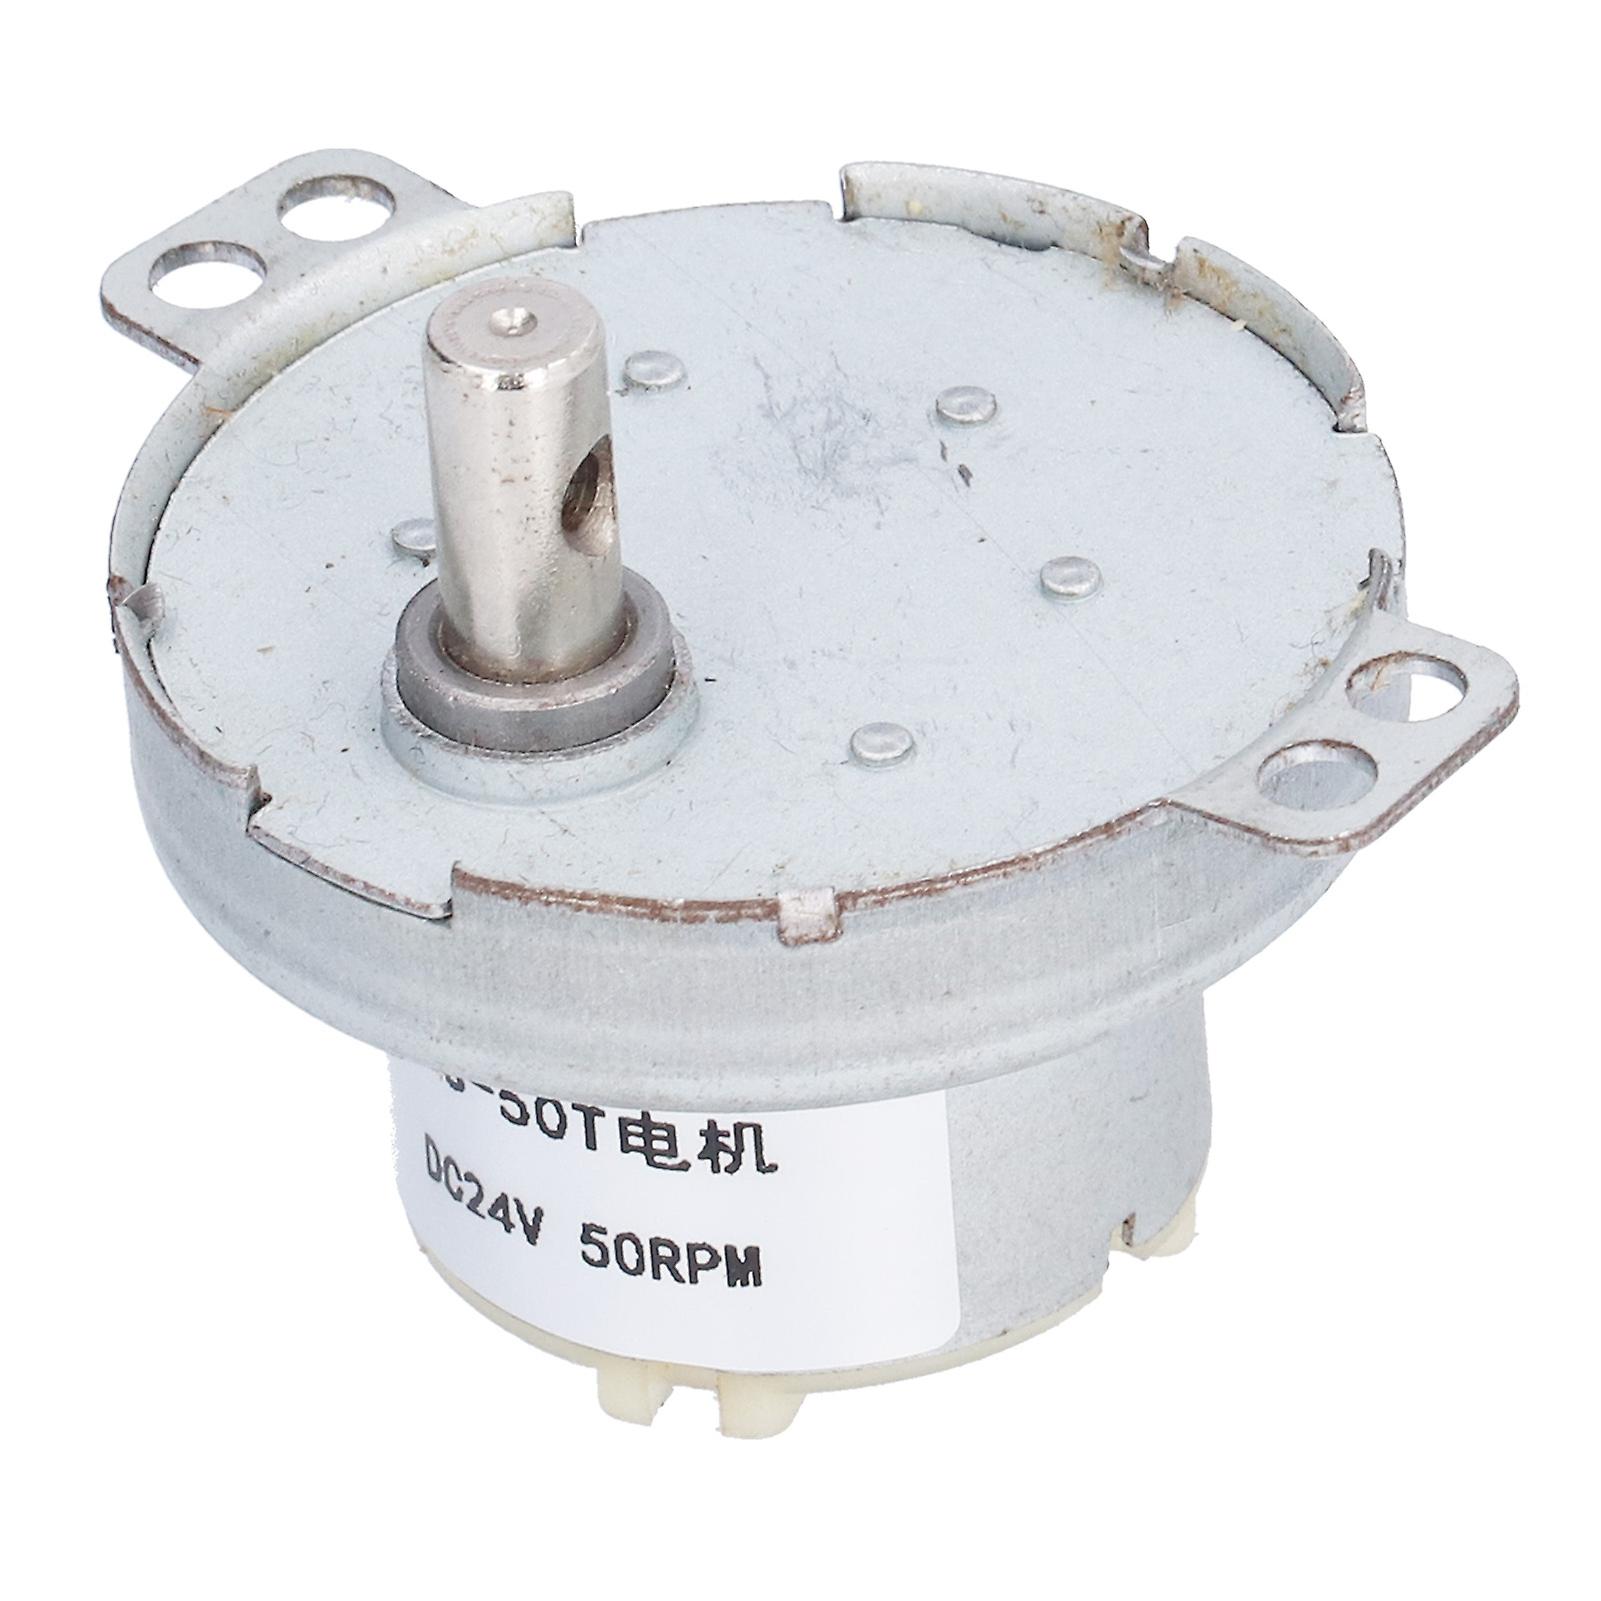 Gear Motor Reduction Geared Box Equipment Industrial Control Supplies 50rpm Dc24v Js50t